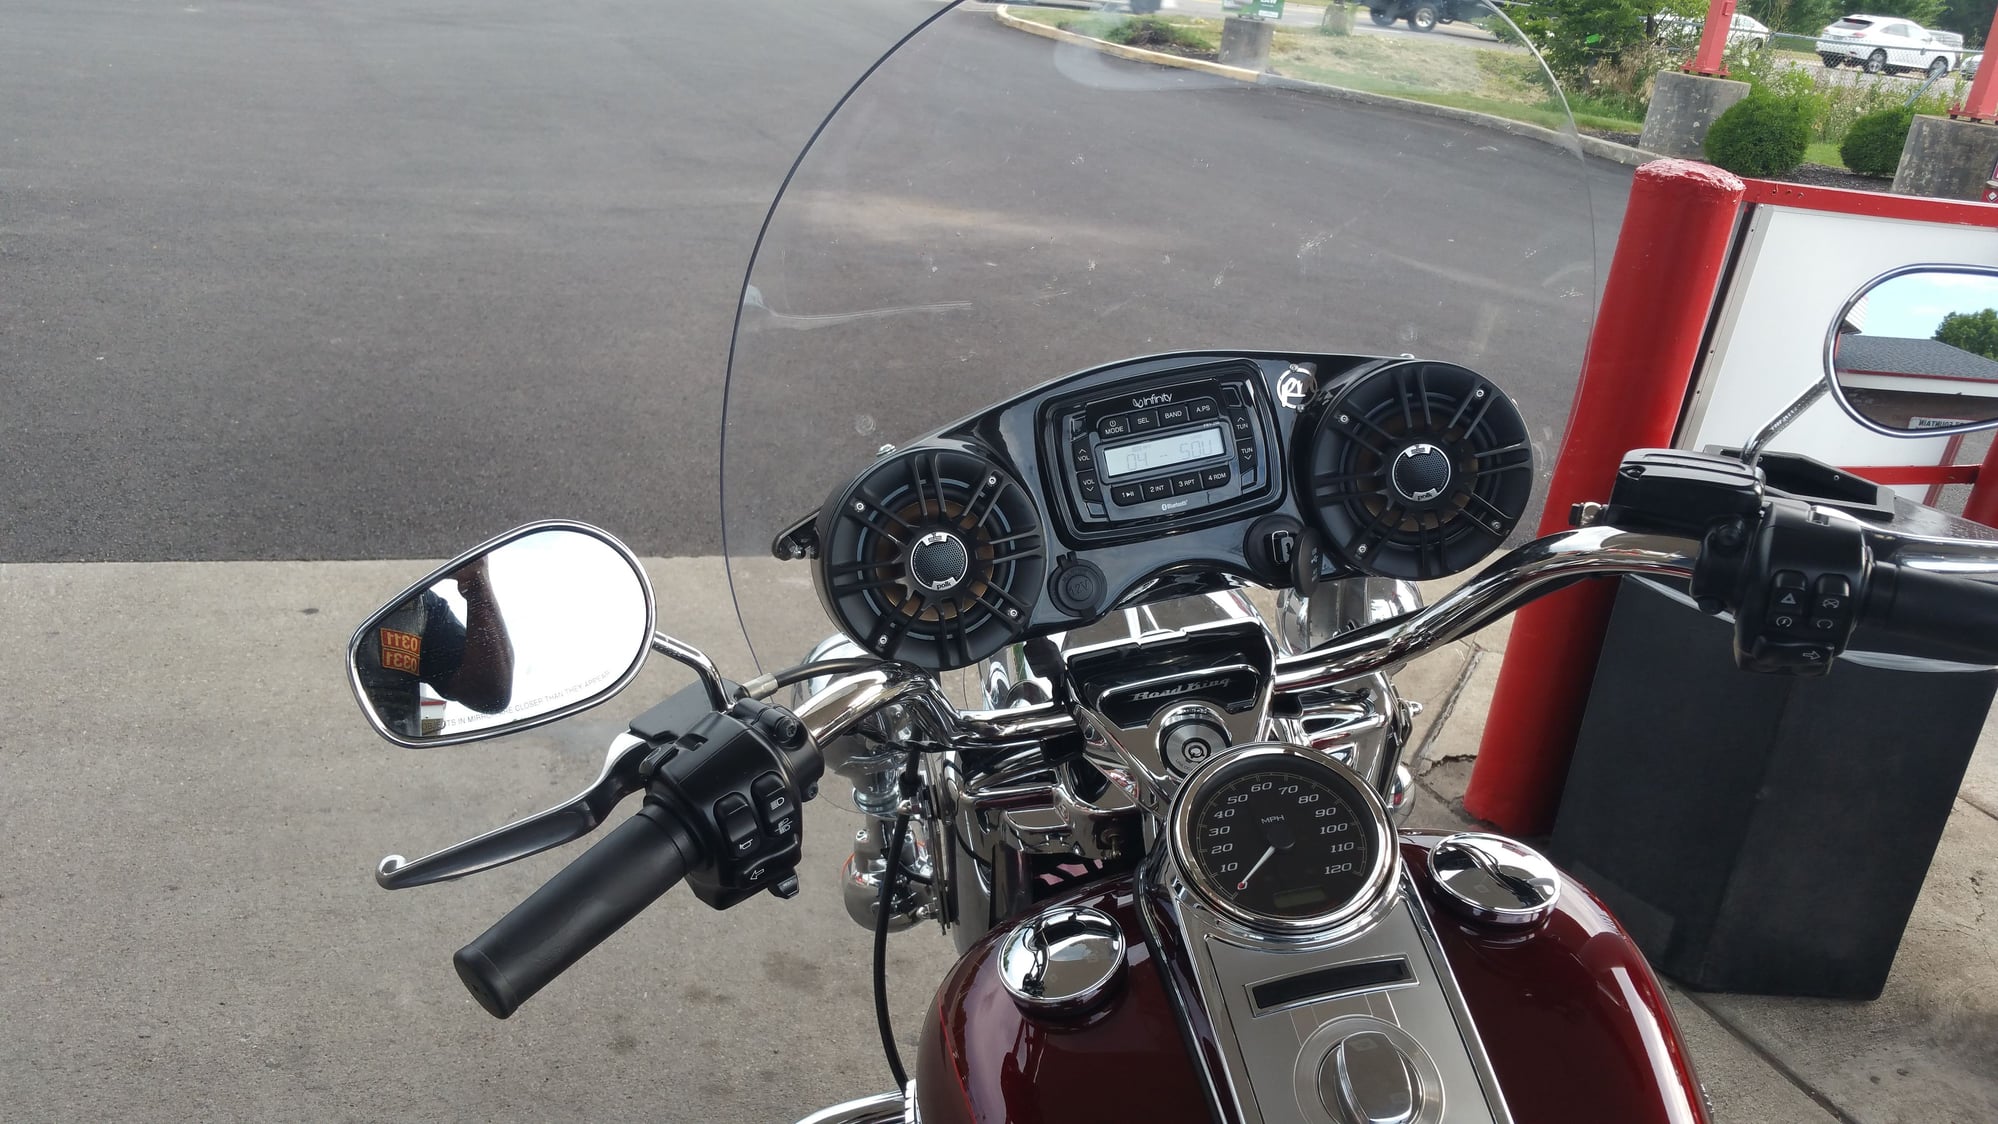 Best looking tunes set up for road king with no fairing? - Harley